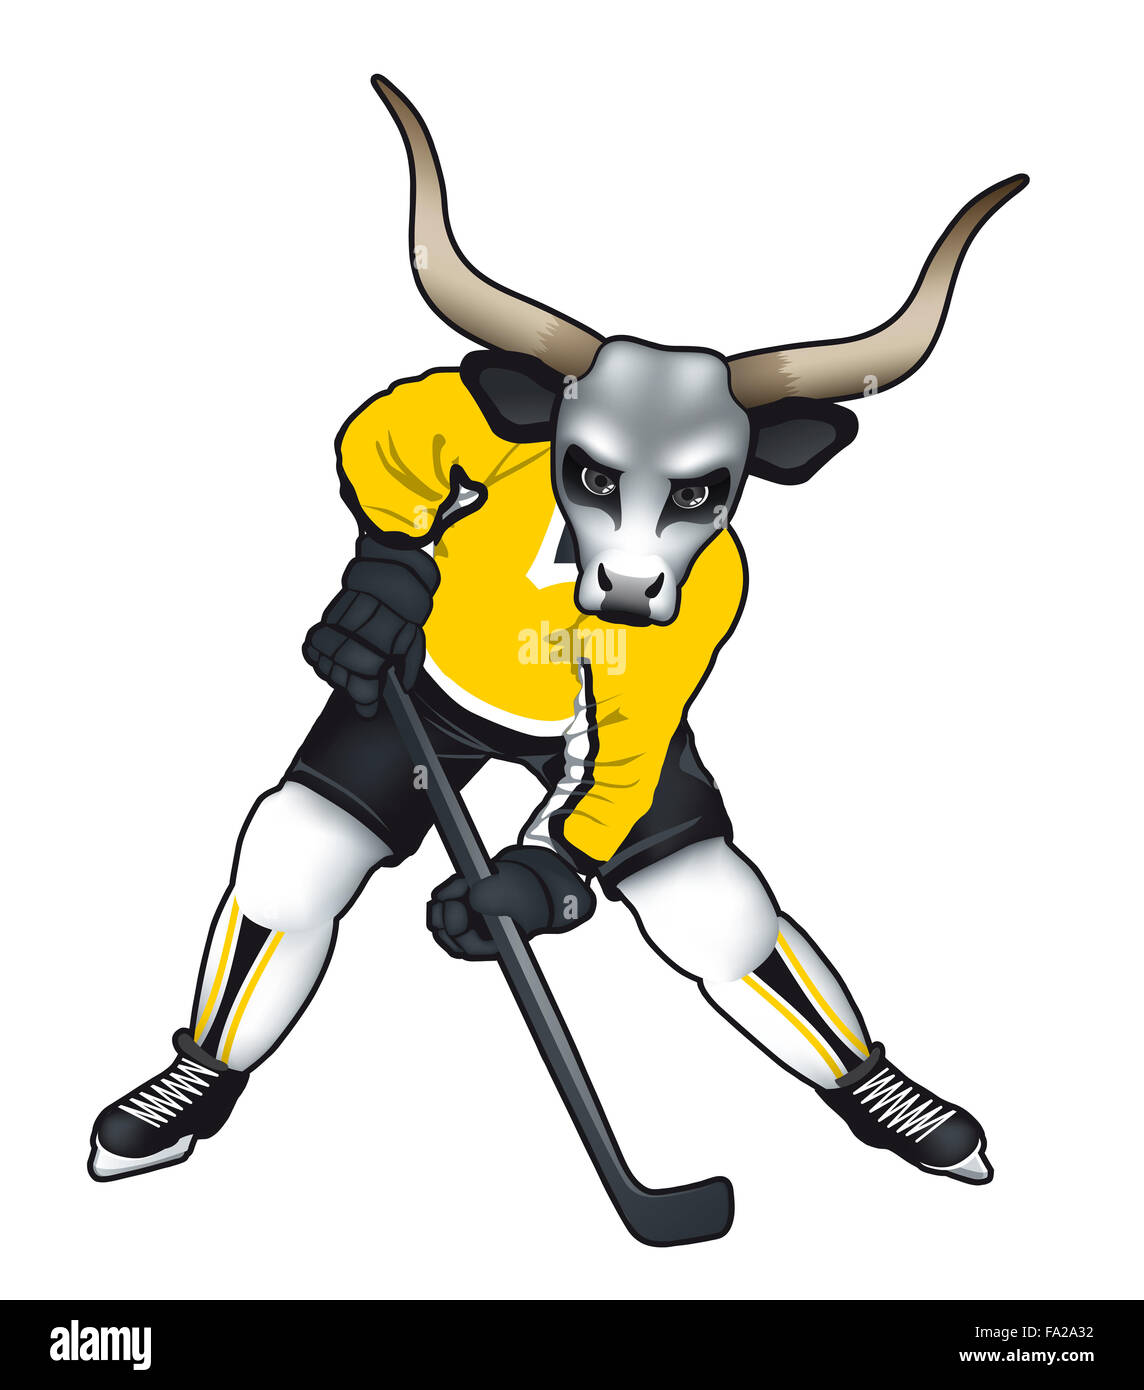 Vector illustration of a bull mascot for ice hockey team or . Stock Photo